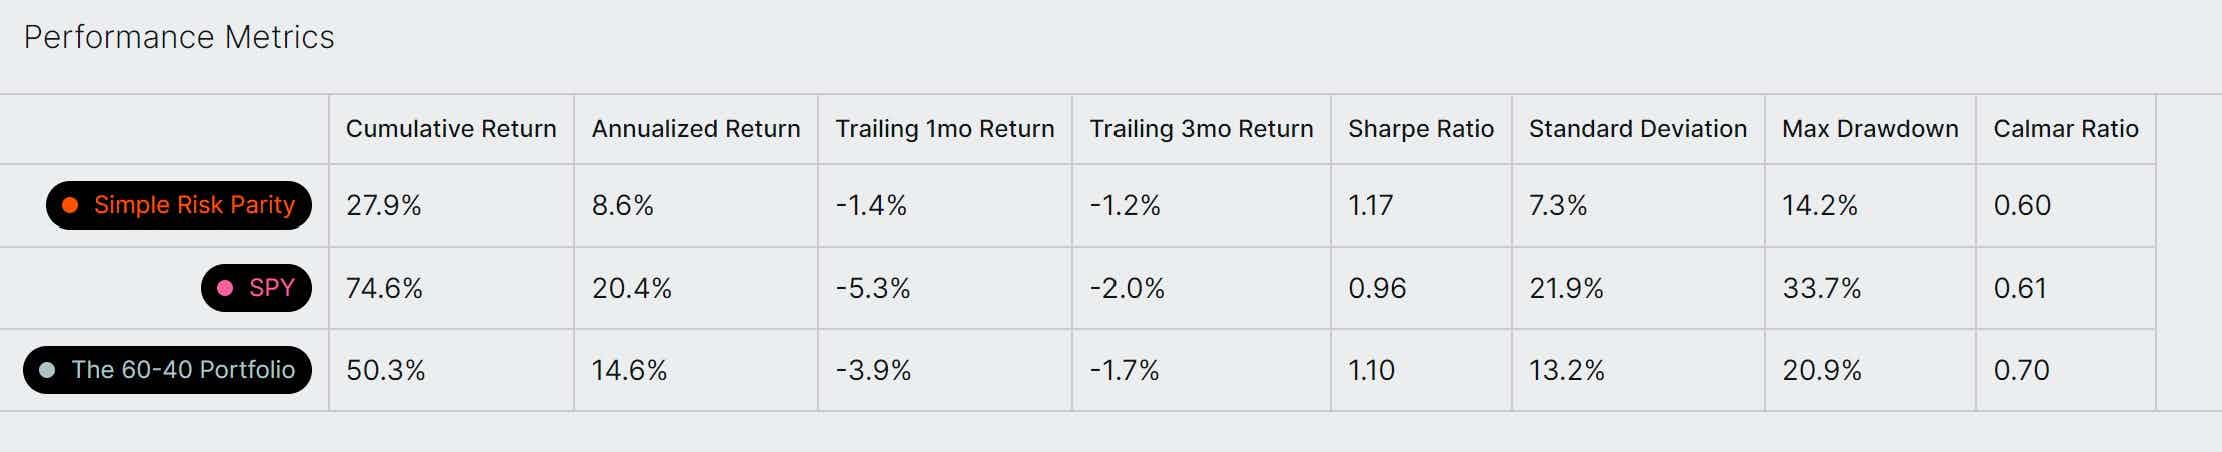 A comparison of a simple risk parity investment strategy, the S&P 500, and a traditional 60/40 Portfolio